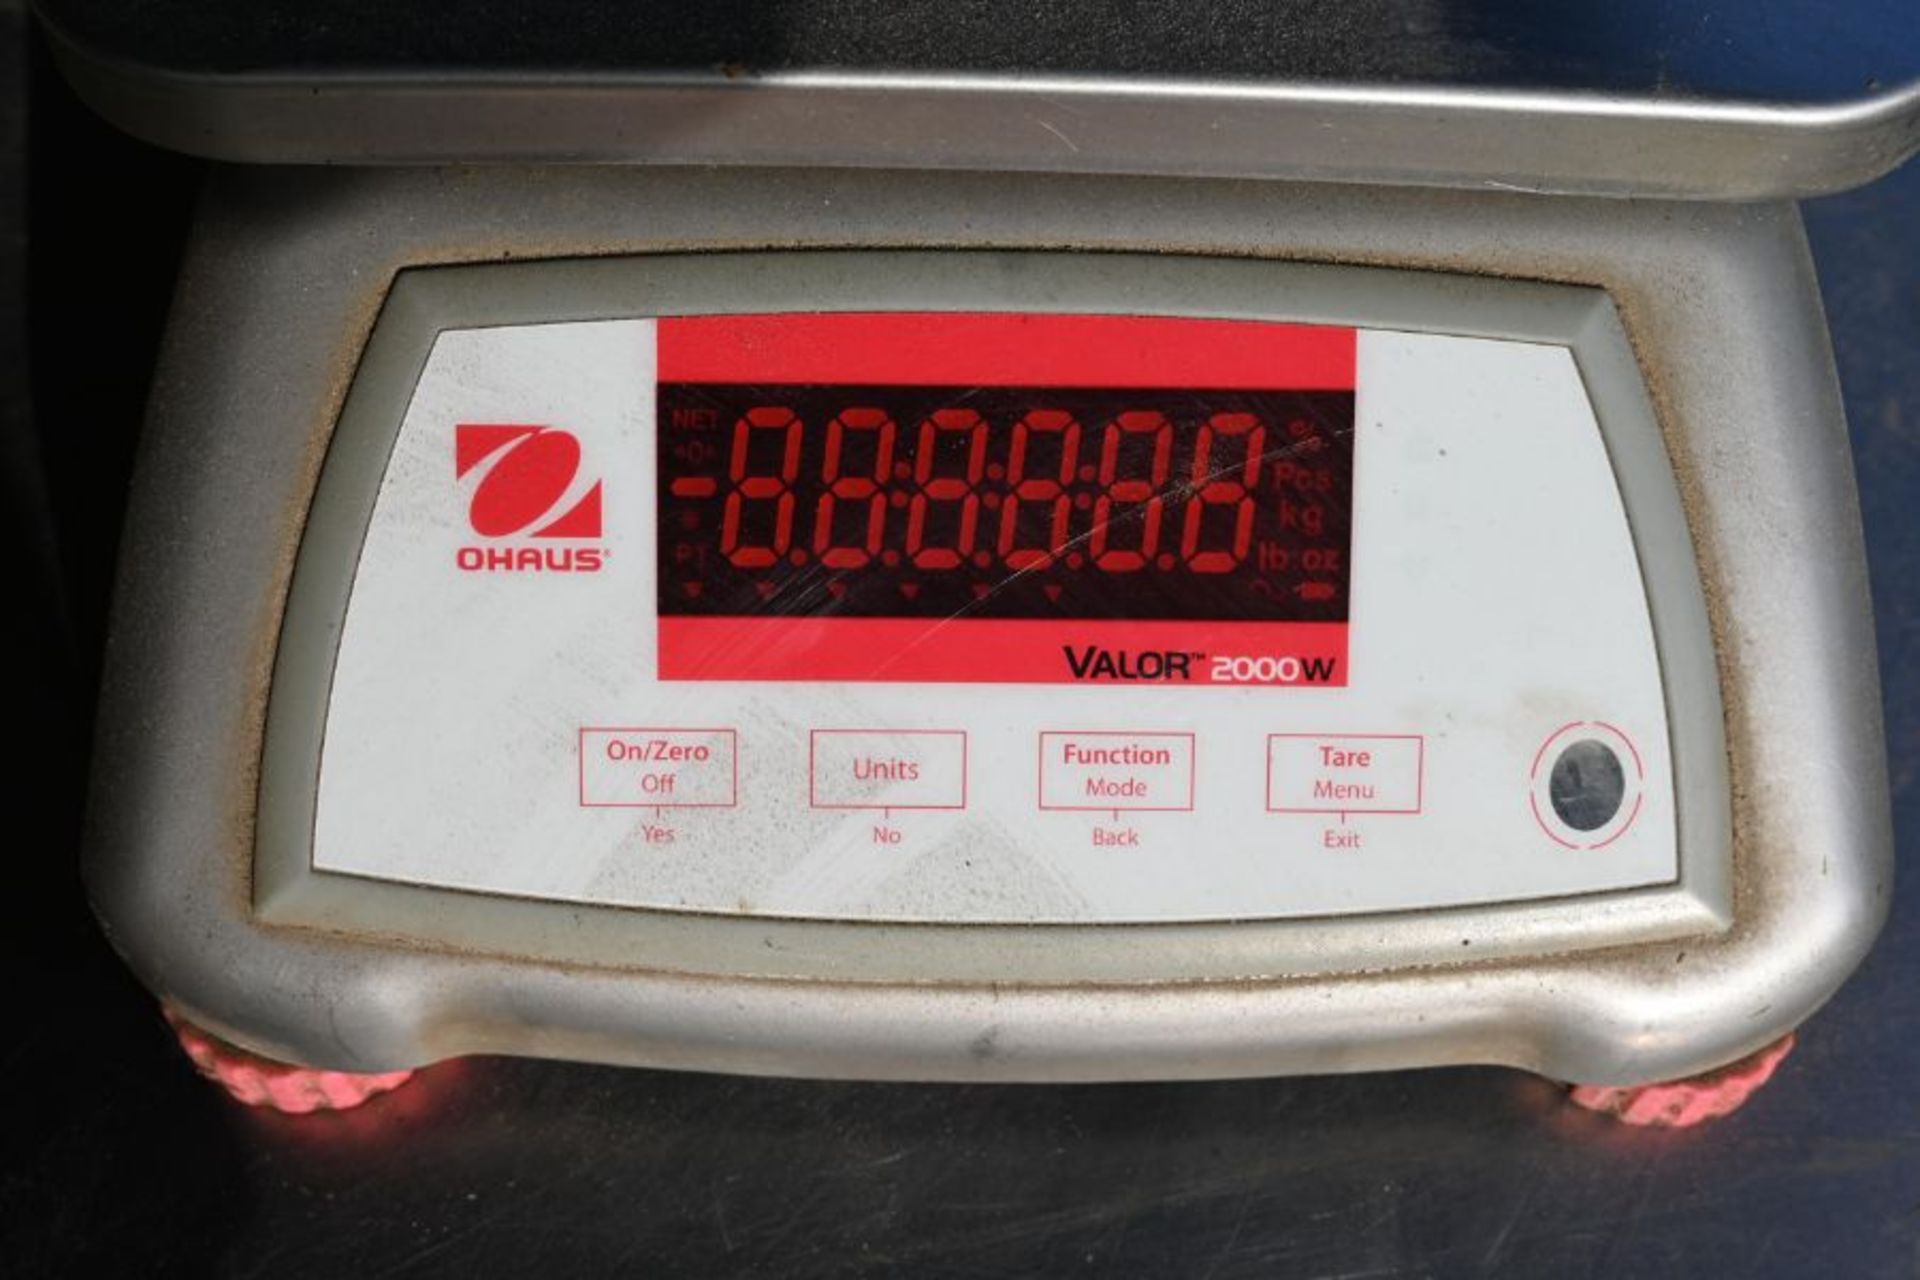 Ohaus Valor 2000 model digital weighing scales - Image 4 of 4